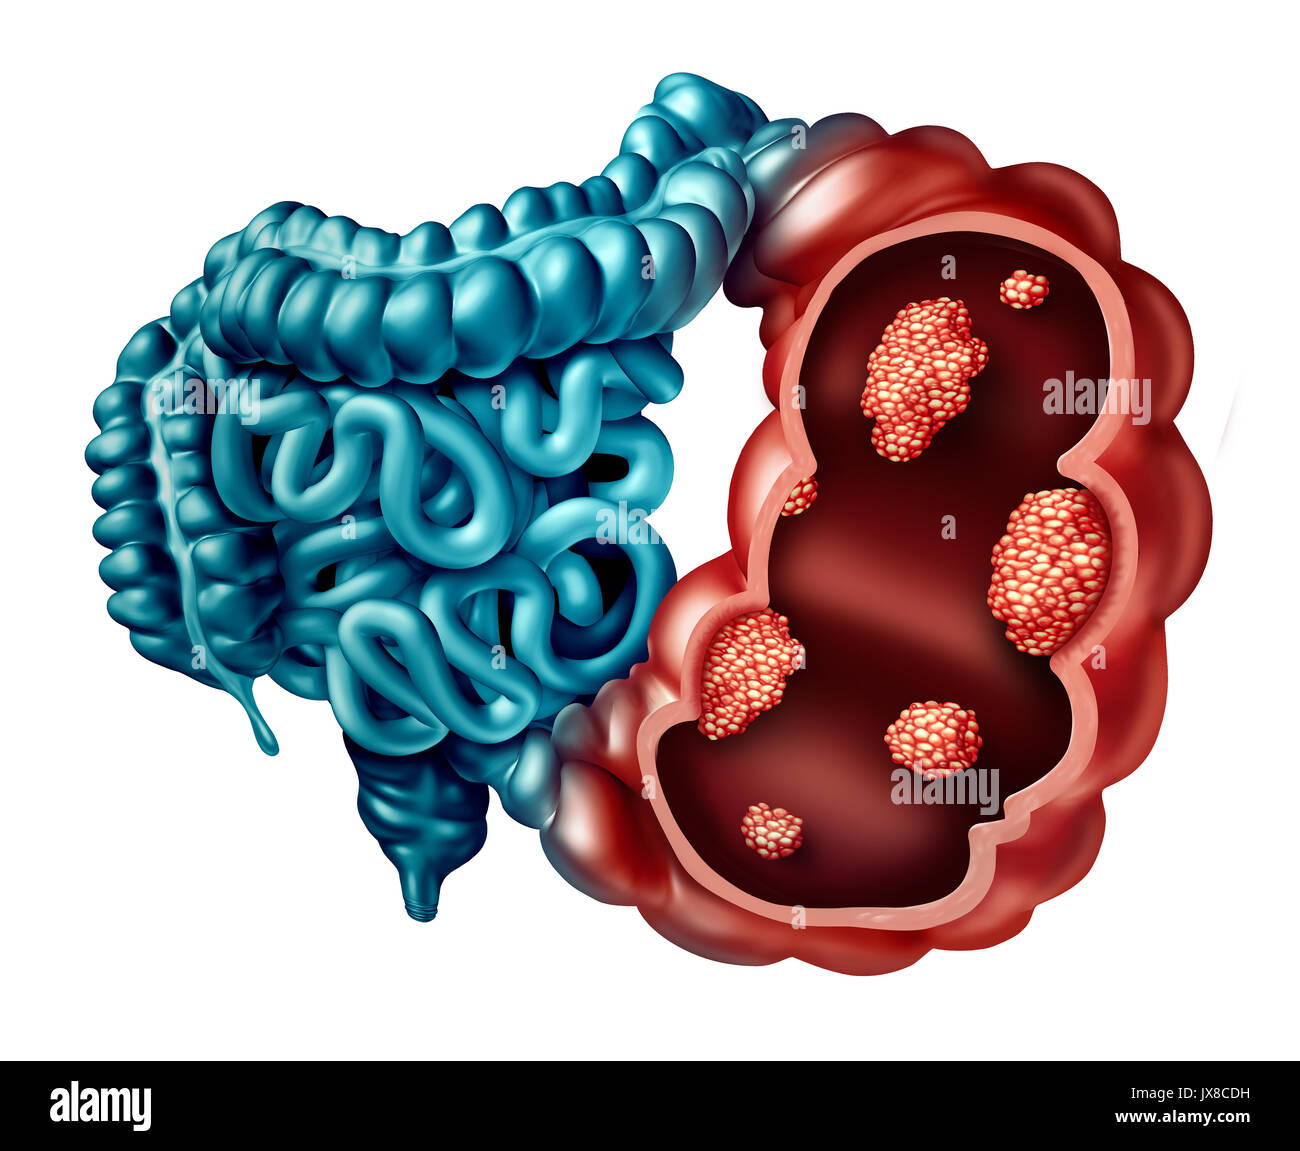 Colon cancer concept as a human intestine disease with forced perspective with microscopic malignant tumor inside the human anatomy. Stock Photo